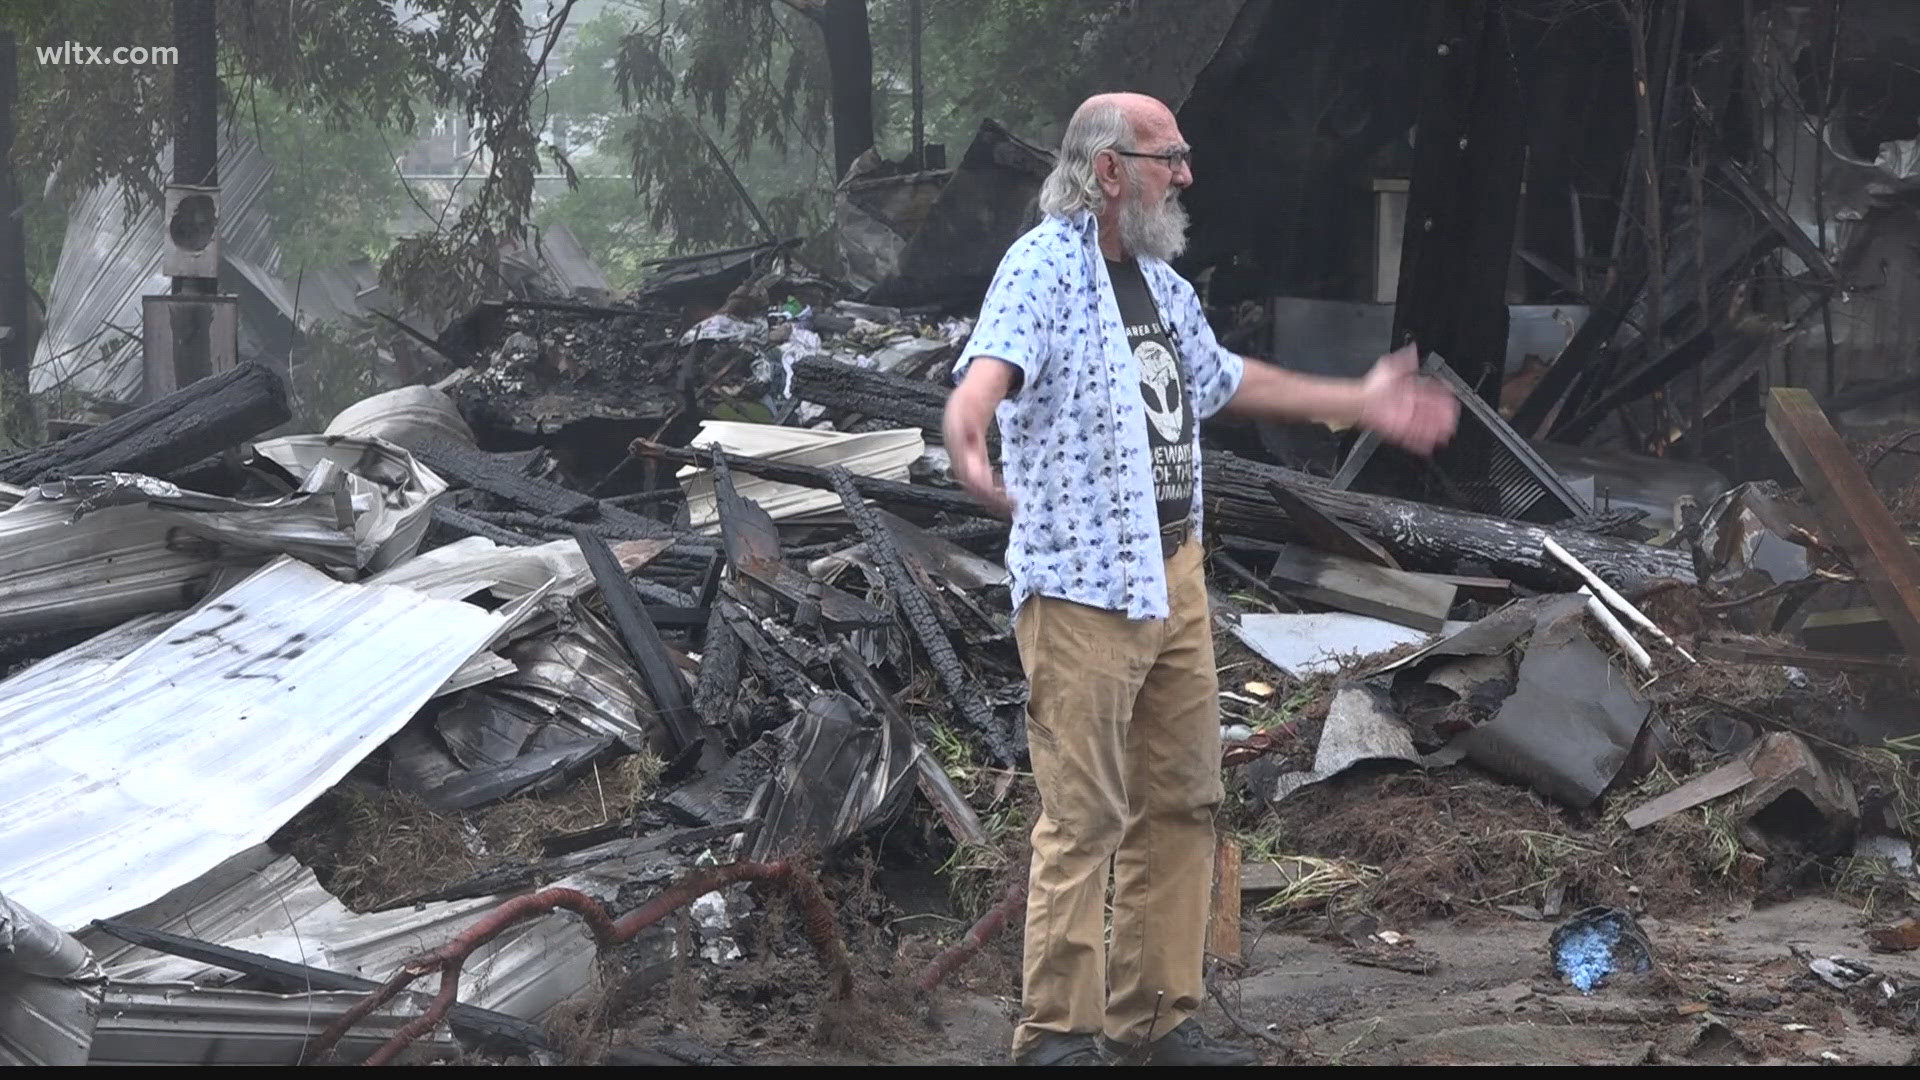 Along with the UFO welcome center burned so did Jody Pendarvis's home.